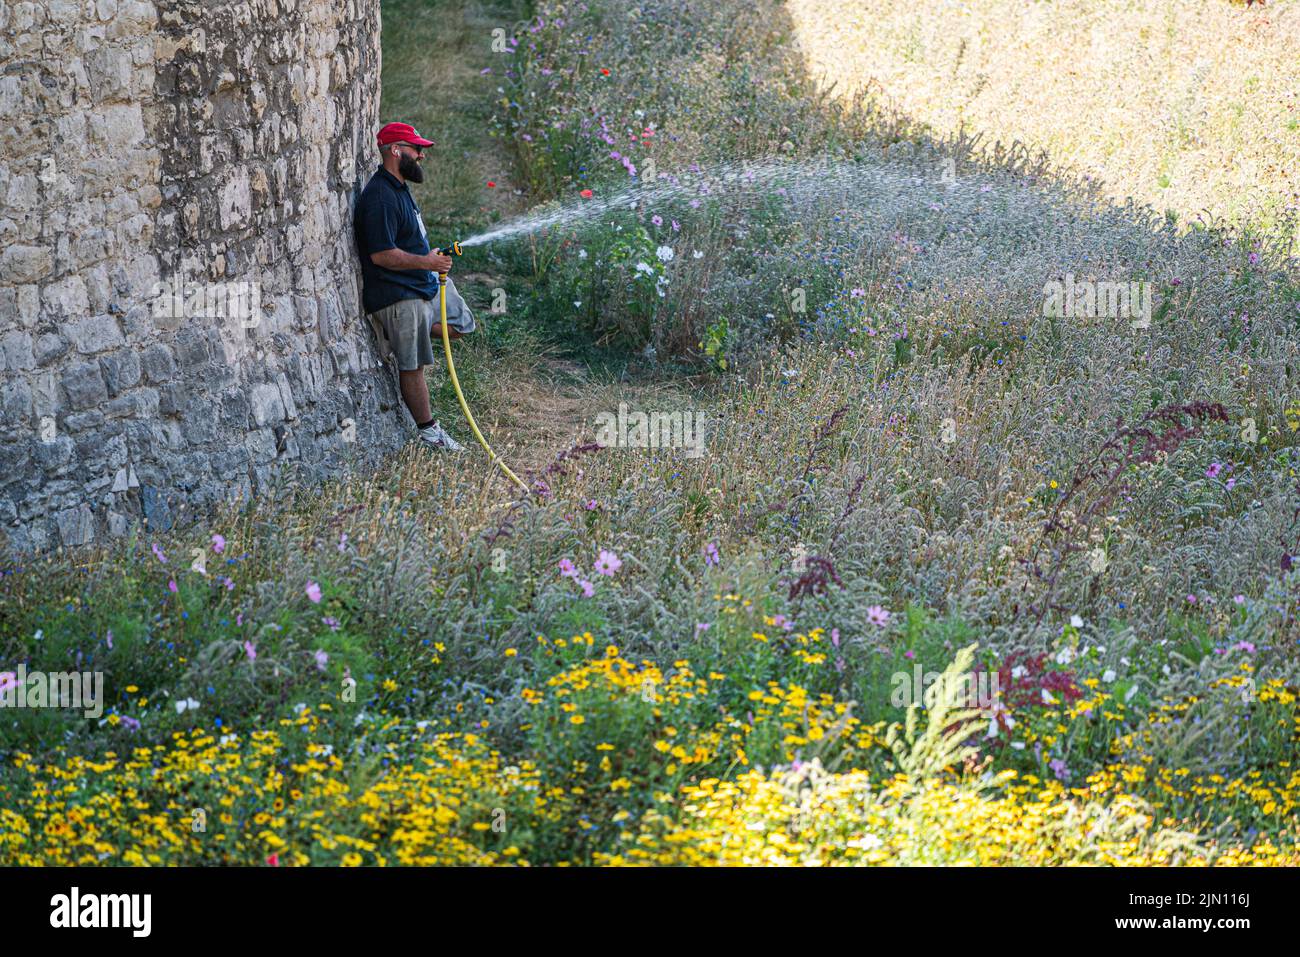 London, UK. 8 August 2022   A gardener watering the Superbloom, a new permanent display of wildflowers in the moat of the Tower of London, grown from over 20 million seeds from 29 flower species which were sown to celebrate the Queen’s Platinum Jubilee. The flowers were chosen to attract a variety of pollinators to create a new biodiverse habitat..Credit. amer ghazzal/Alamy Live News Stock Photo